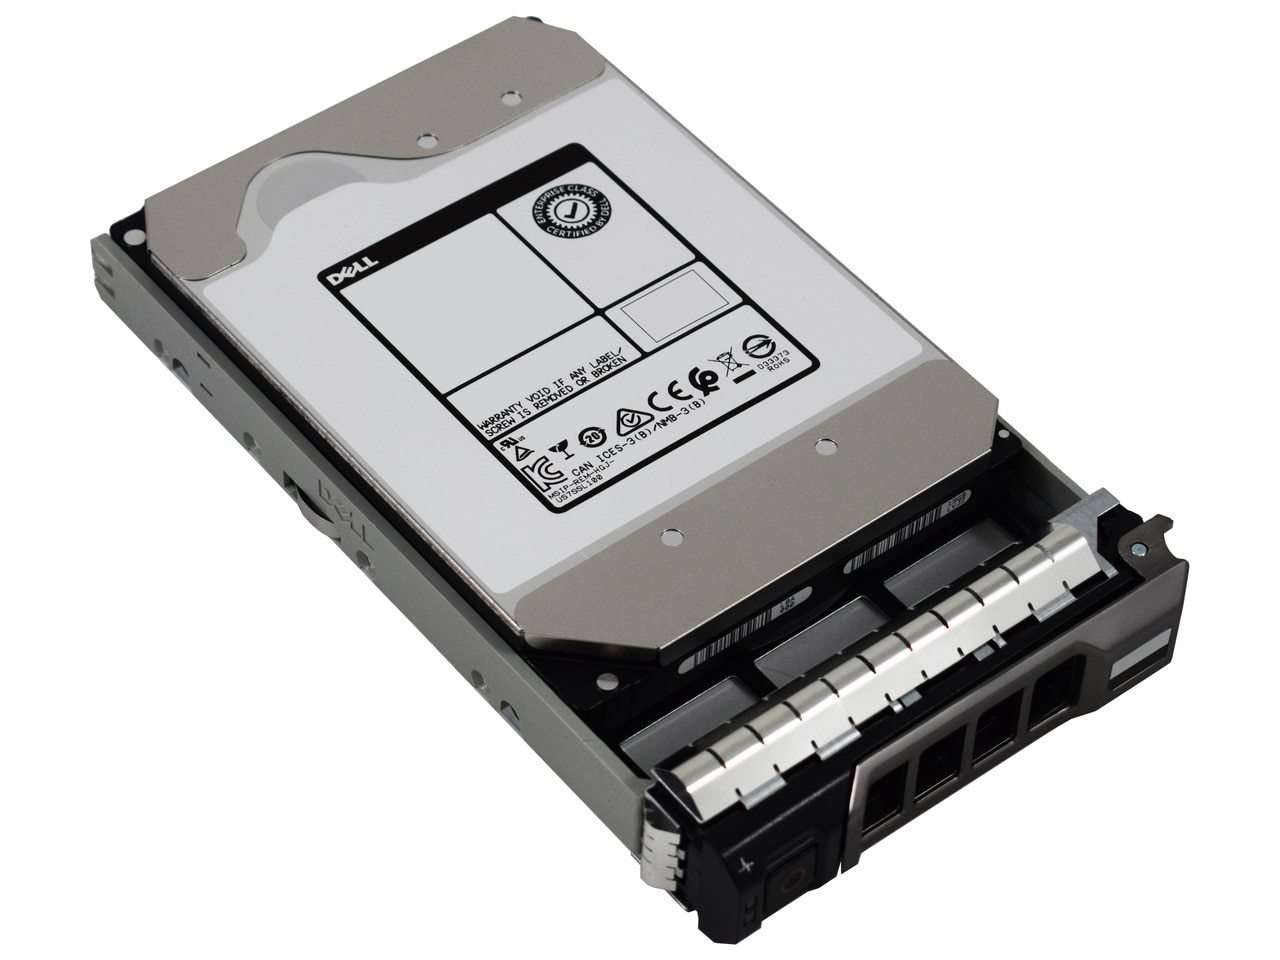 Dell G13 400-AGMM 6TB 7.2K RPM SATA 6Gb/s 512e 3.5" Manufacturer Recertified HDD